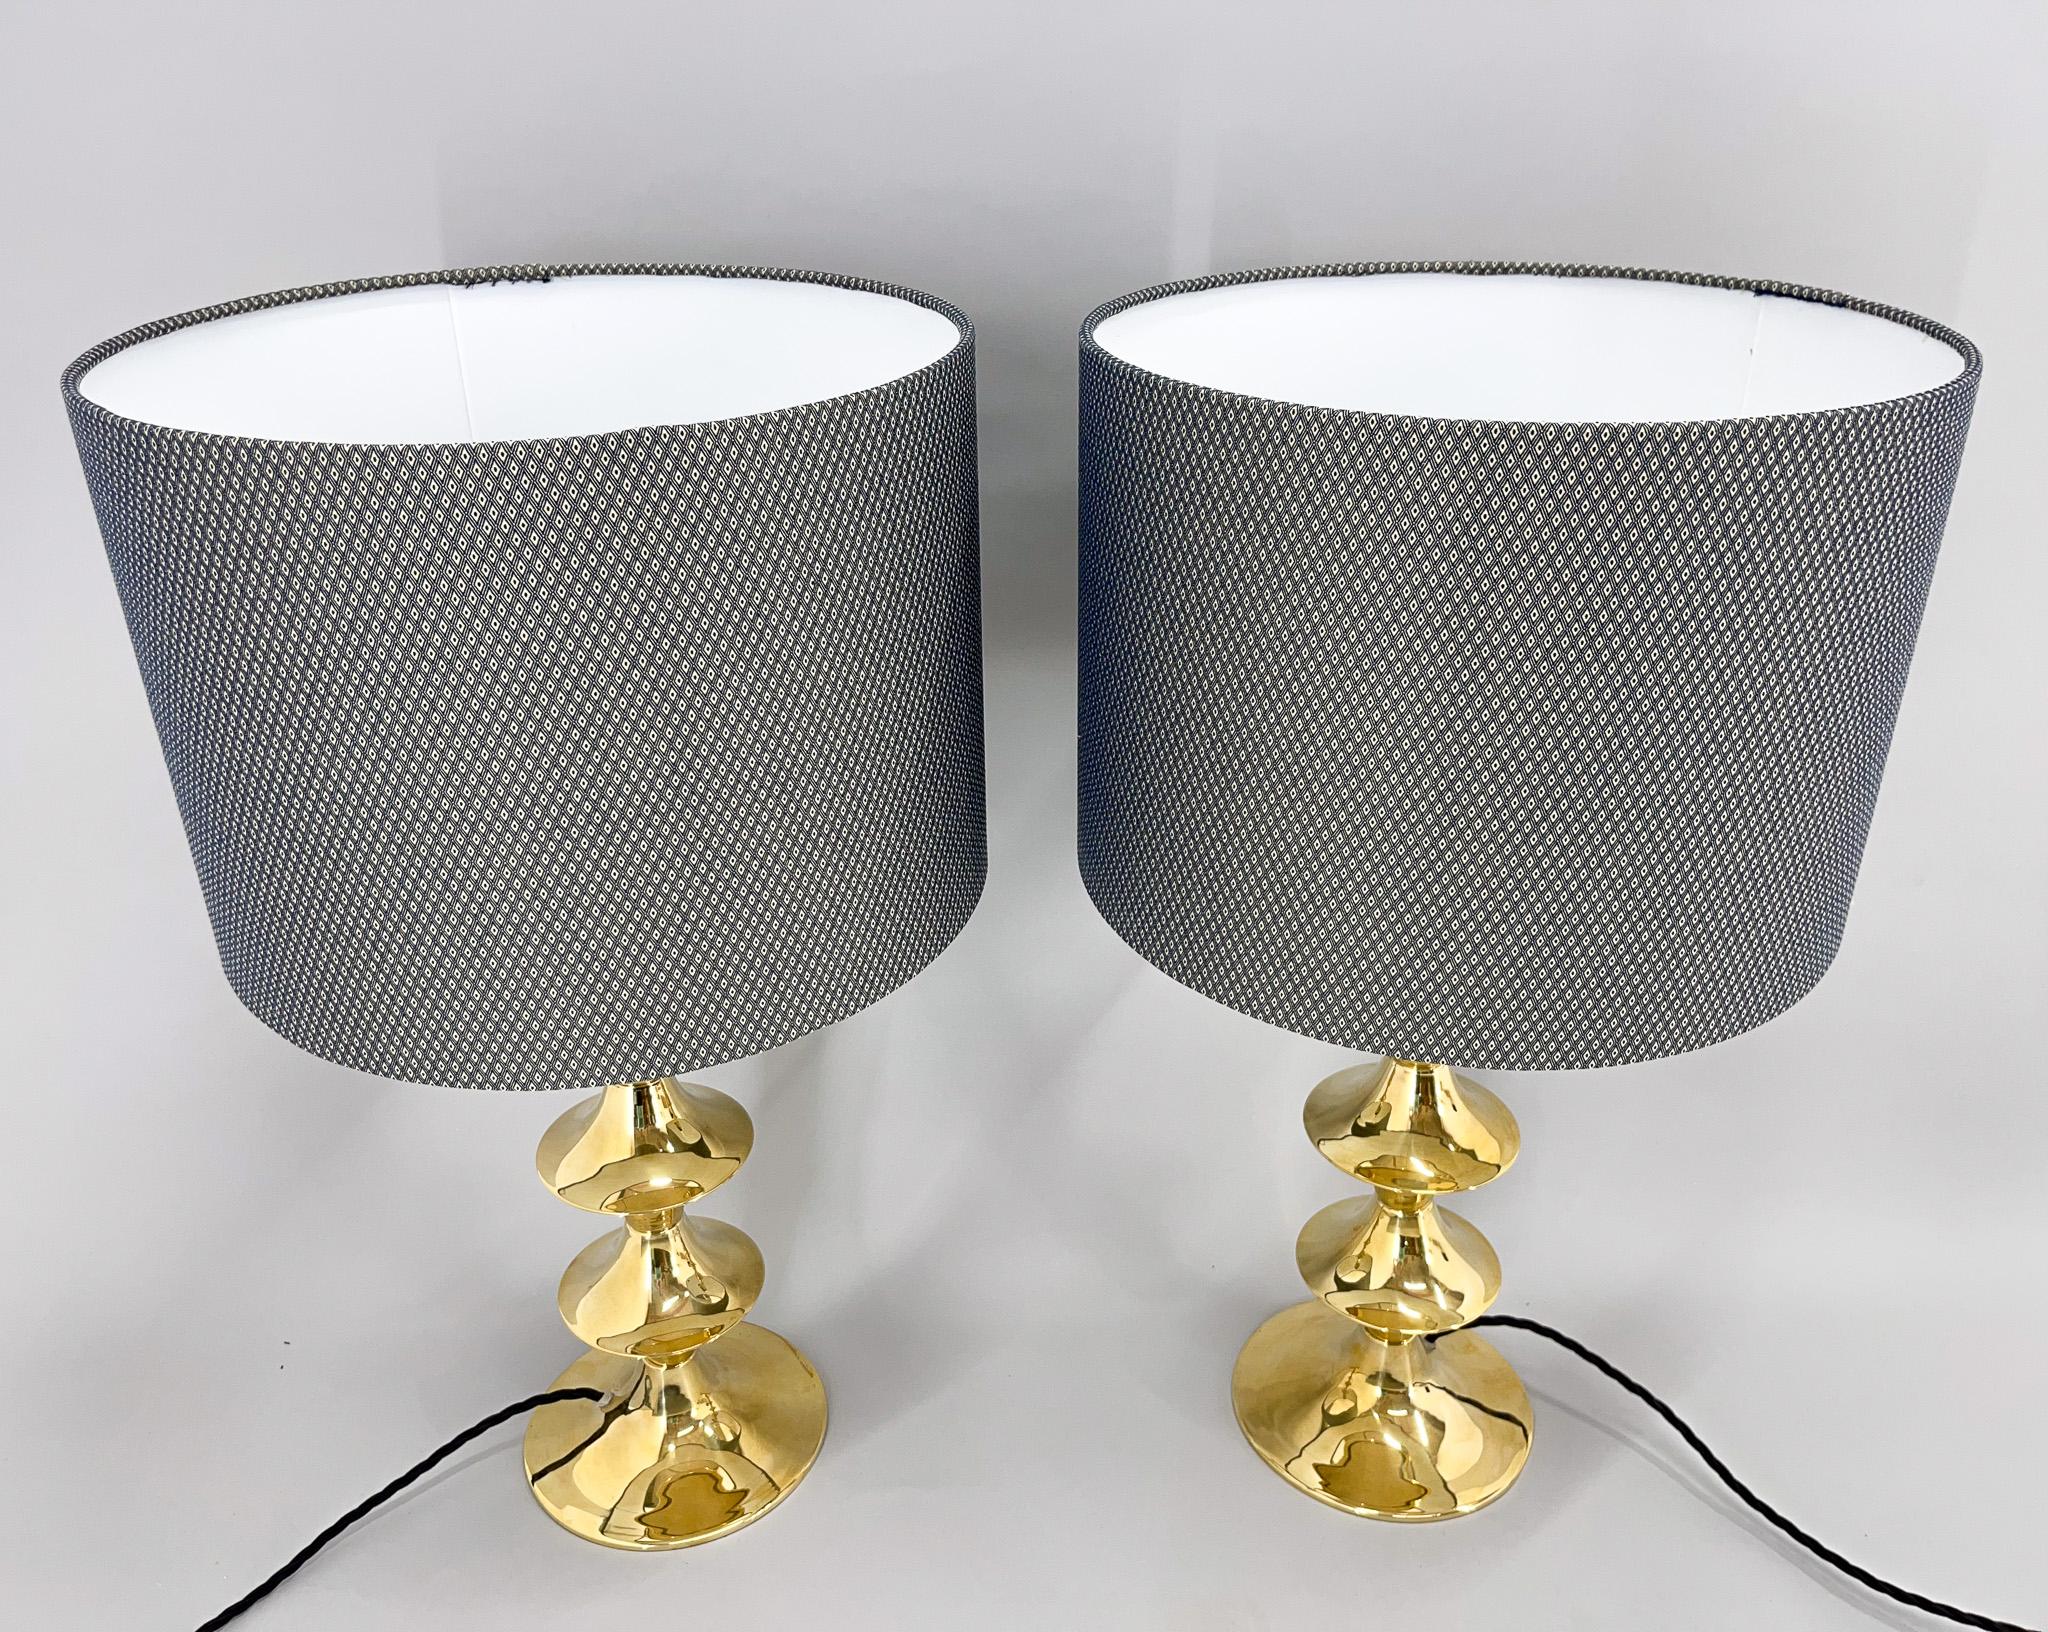 Pair of Mid-Century Brass Table Lamps, 1950s, Restored 3